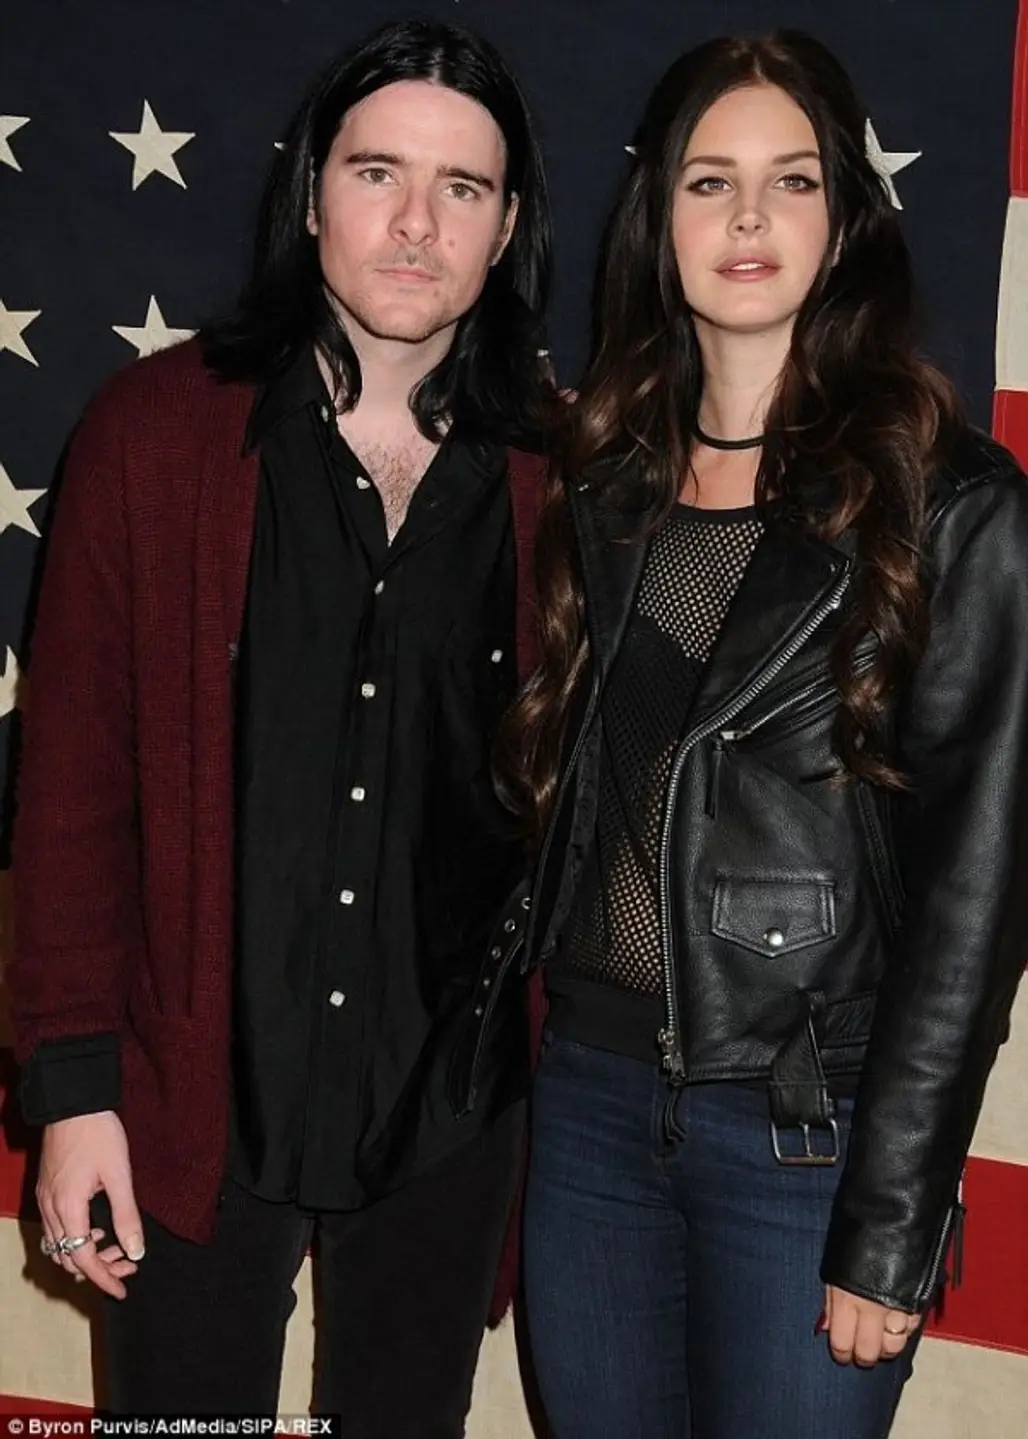 Lana Del Rey and Barrie-James O'Neill